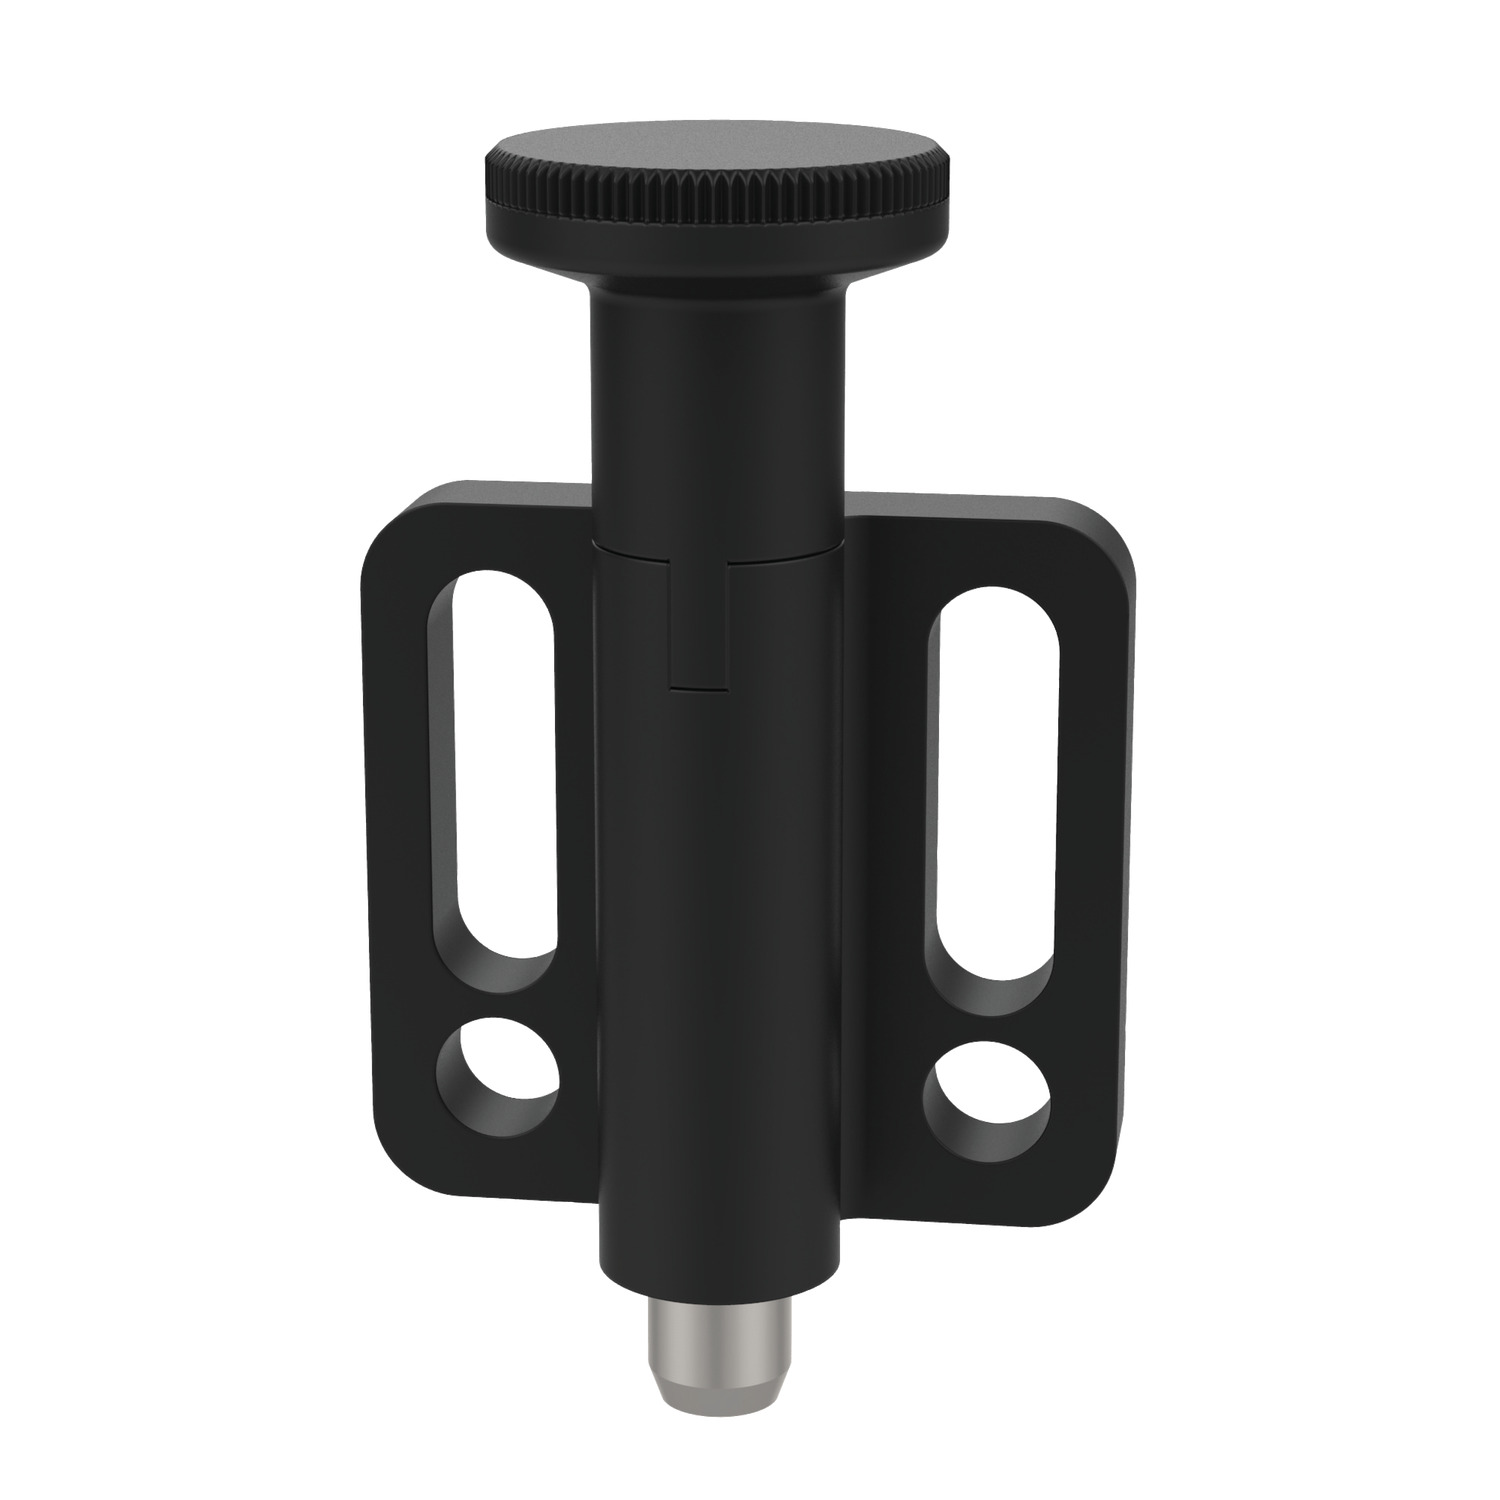 Index Plungers - Pull Grip Pull grip index plunger with flange mounting. Available in locking and non-locking type.